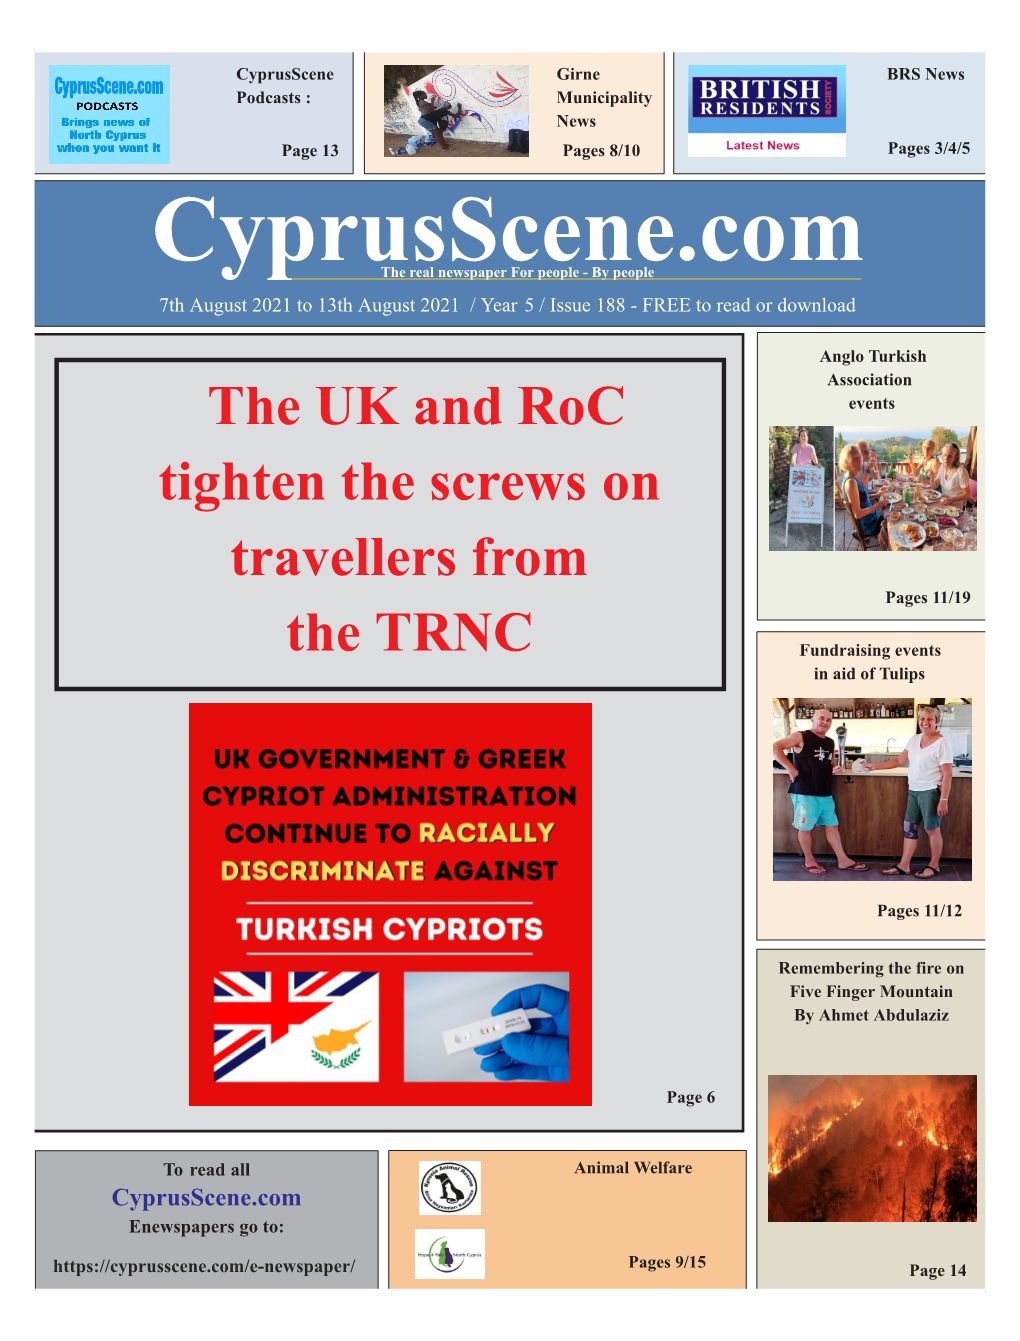 The UK and Roc Tighten the Screws on Travellers from the TRNC